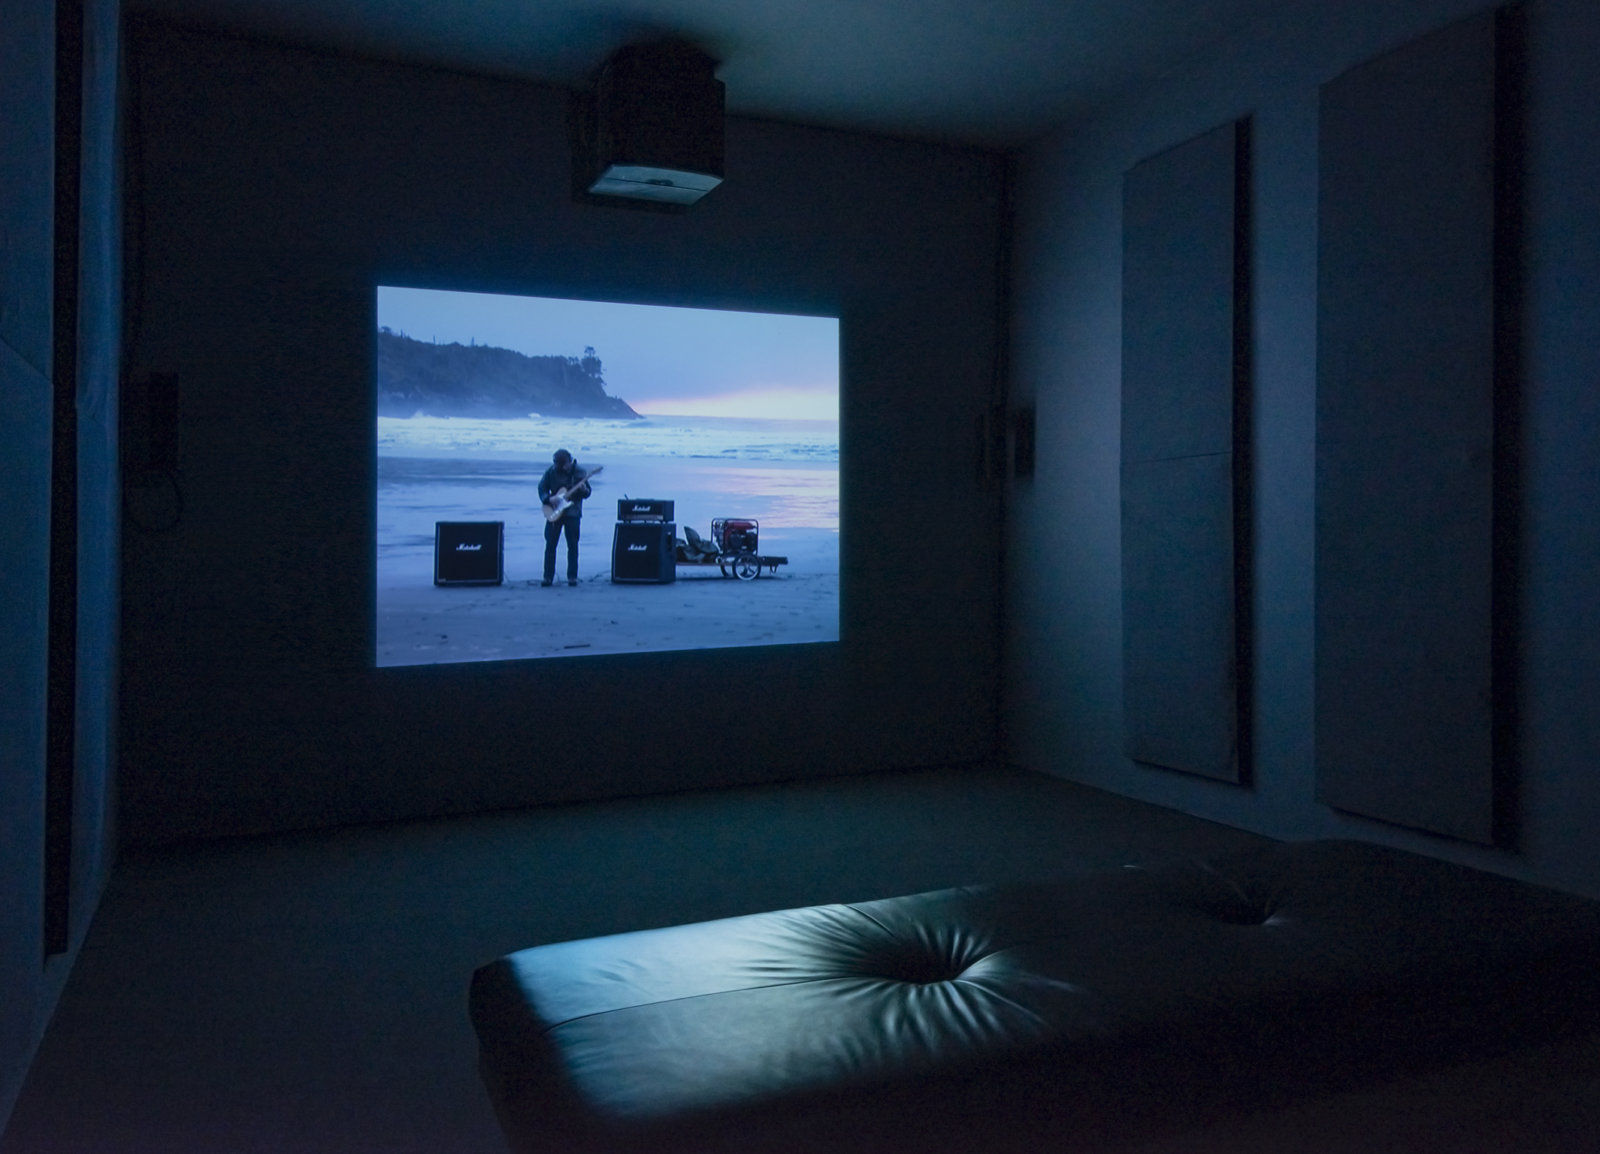 Kevin Schmidt, Long Beach Led Zep, 2002, single channel video from DVD, 9 minutes, 12 seconds looped. Installation view, The Commons, Kamloops Art Gallery, Kamloops, Canada, 2015